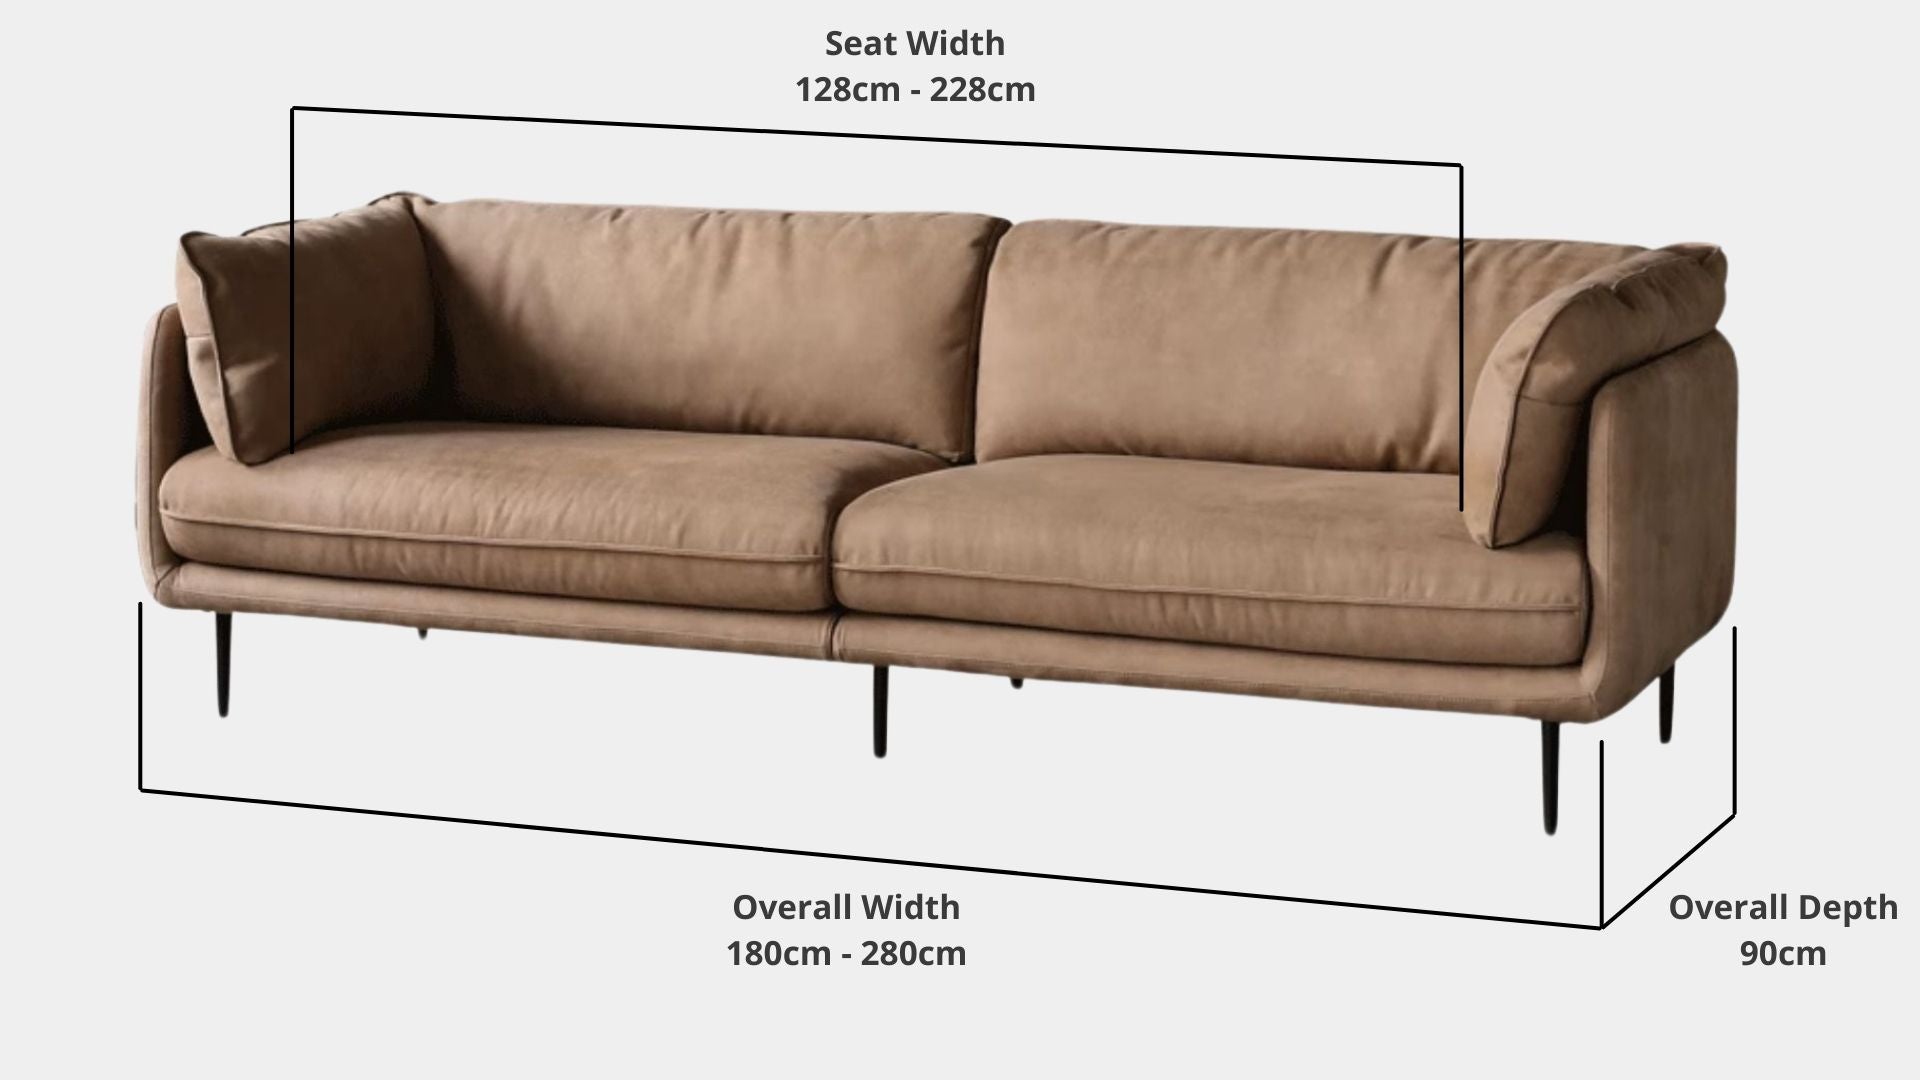 Details the key dimensions in terms of overall width, overall depth and seat width for Cuddle Fabric Sofa